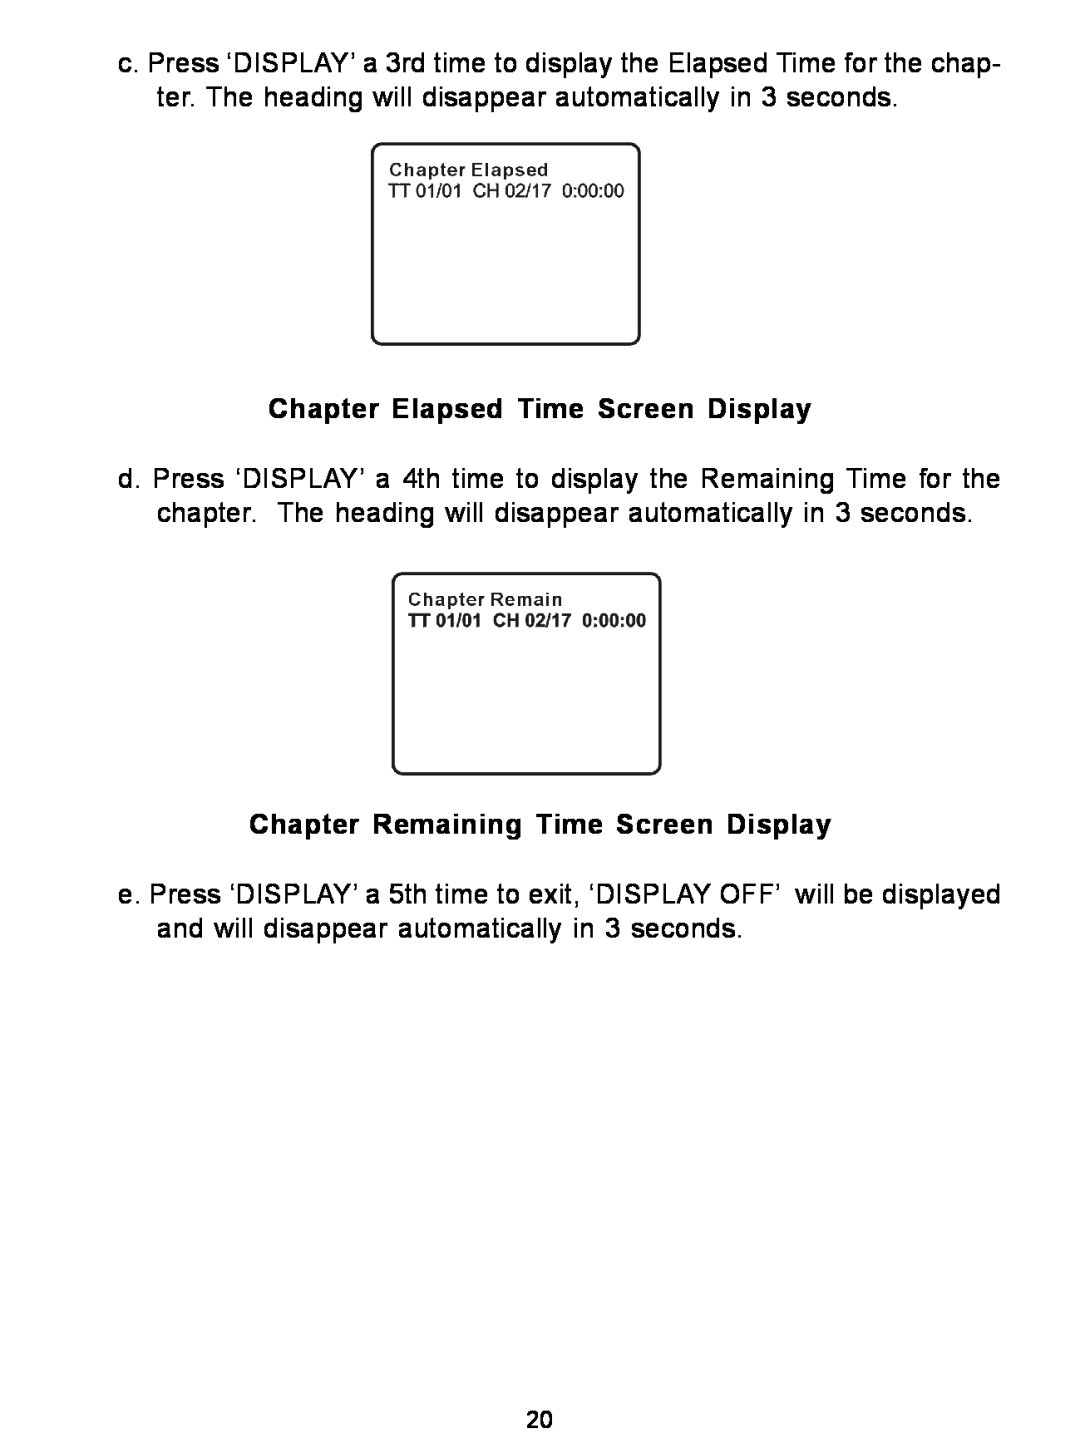 Audiovox D1726 manual Chapter Elapsed Time Screen Display, Chapter Remaining Time Screen Display 